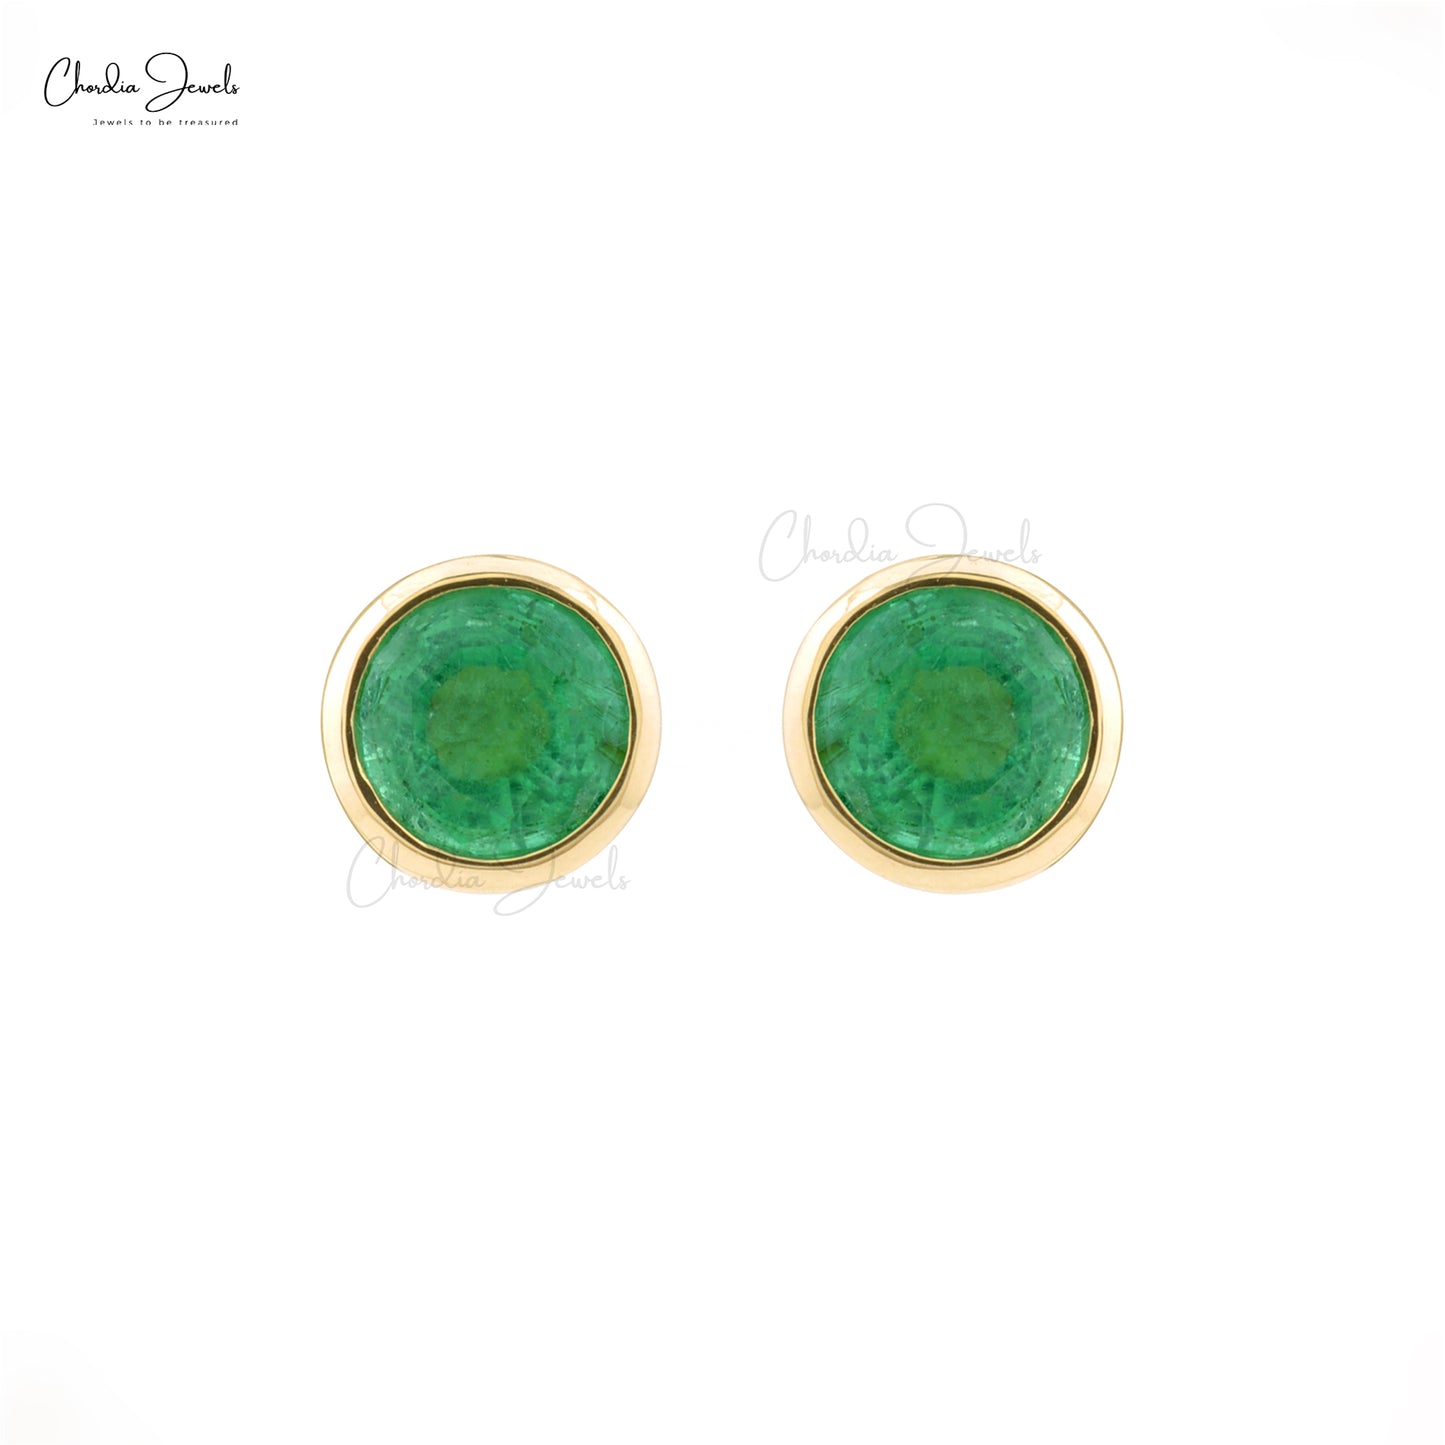 Natural Emerald 0.94Ct Oval cut Gemstone Solitaire Earrings 14k Real Yellow Gold Bezel Set Hallmarked Studs For Her Light Weight Jewelry